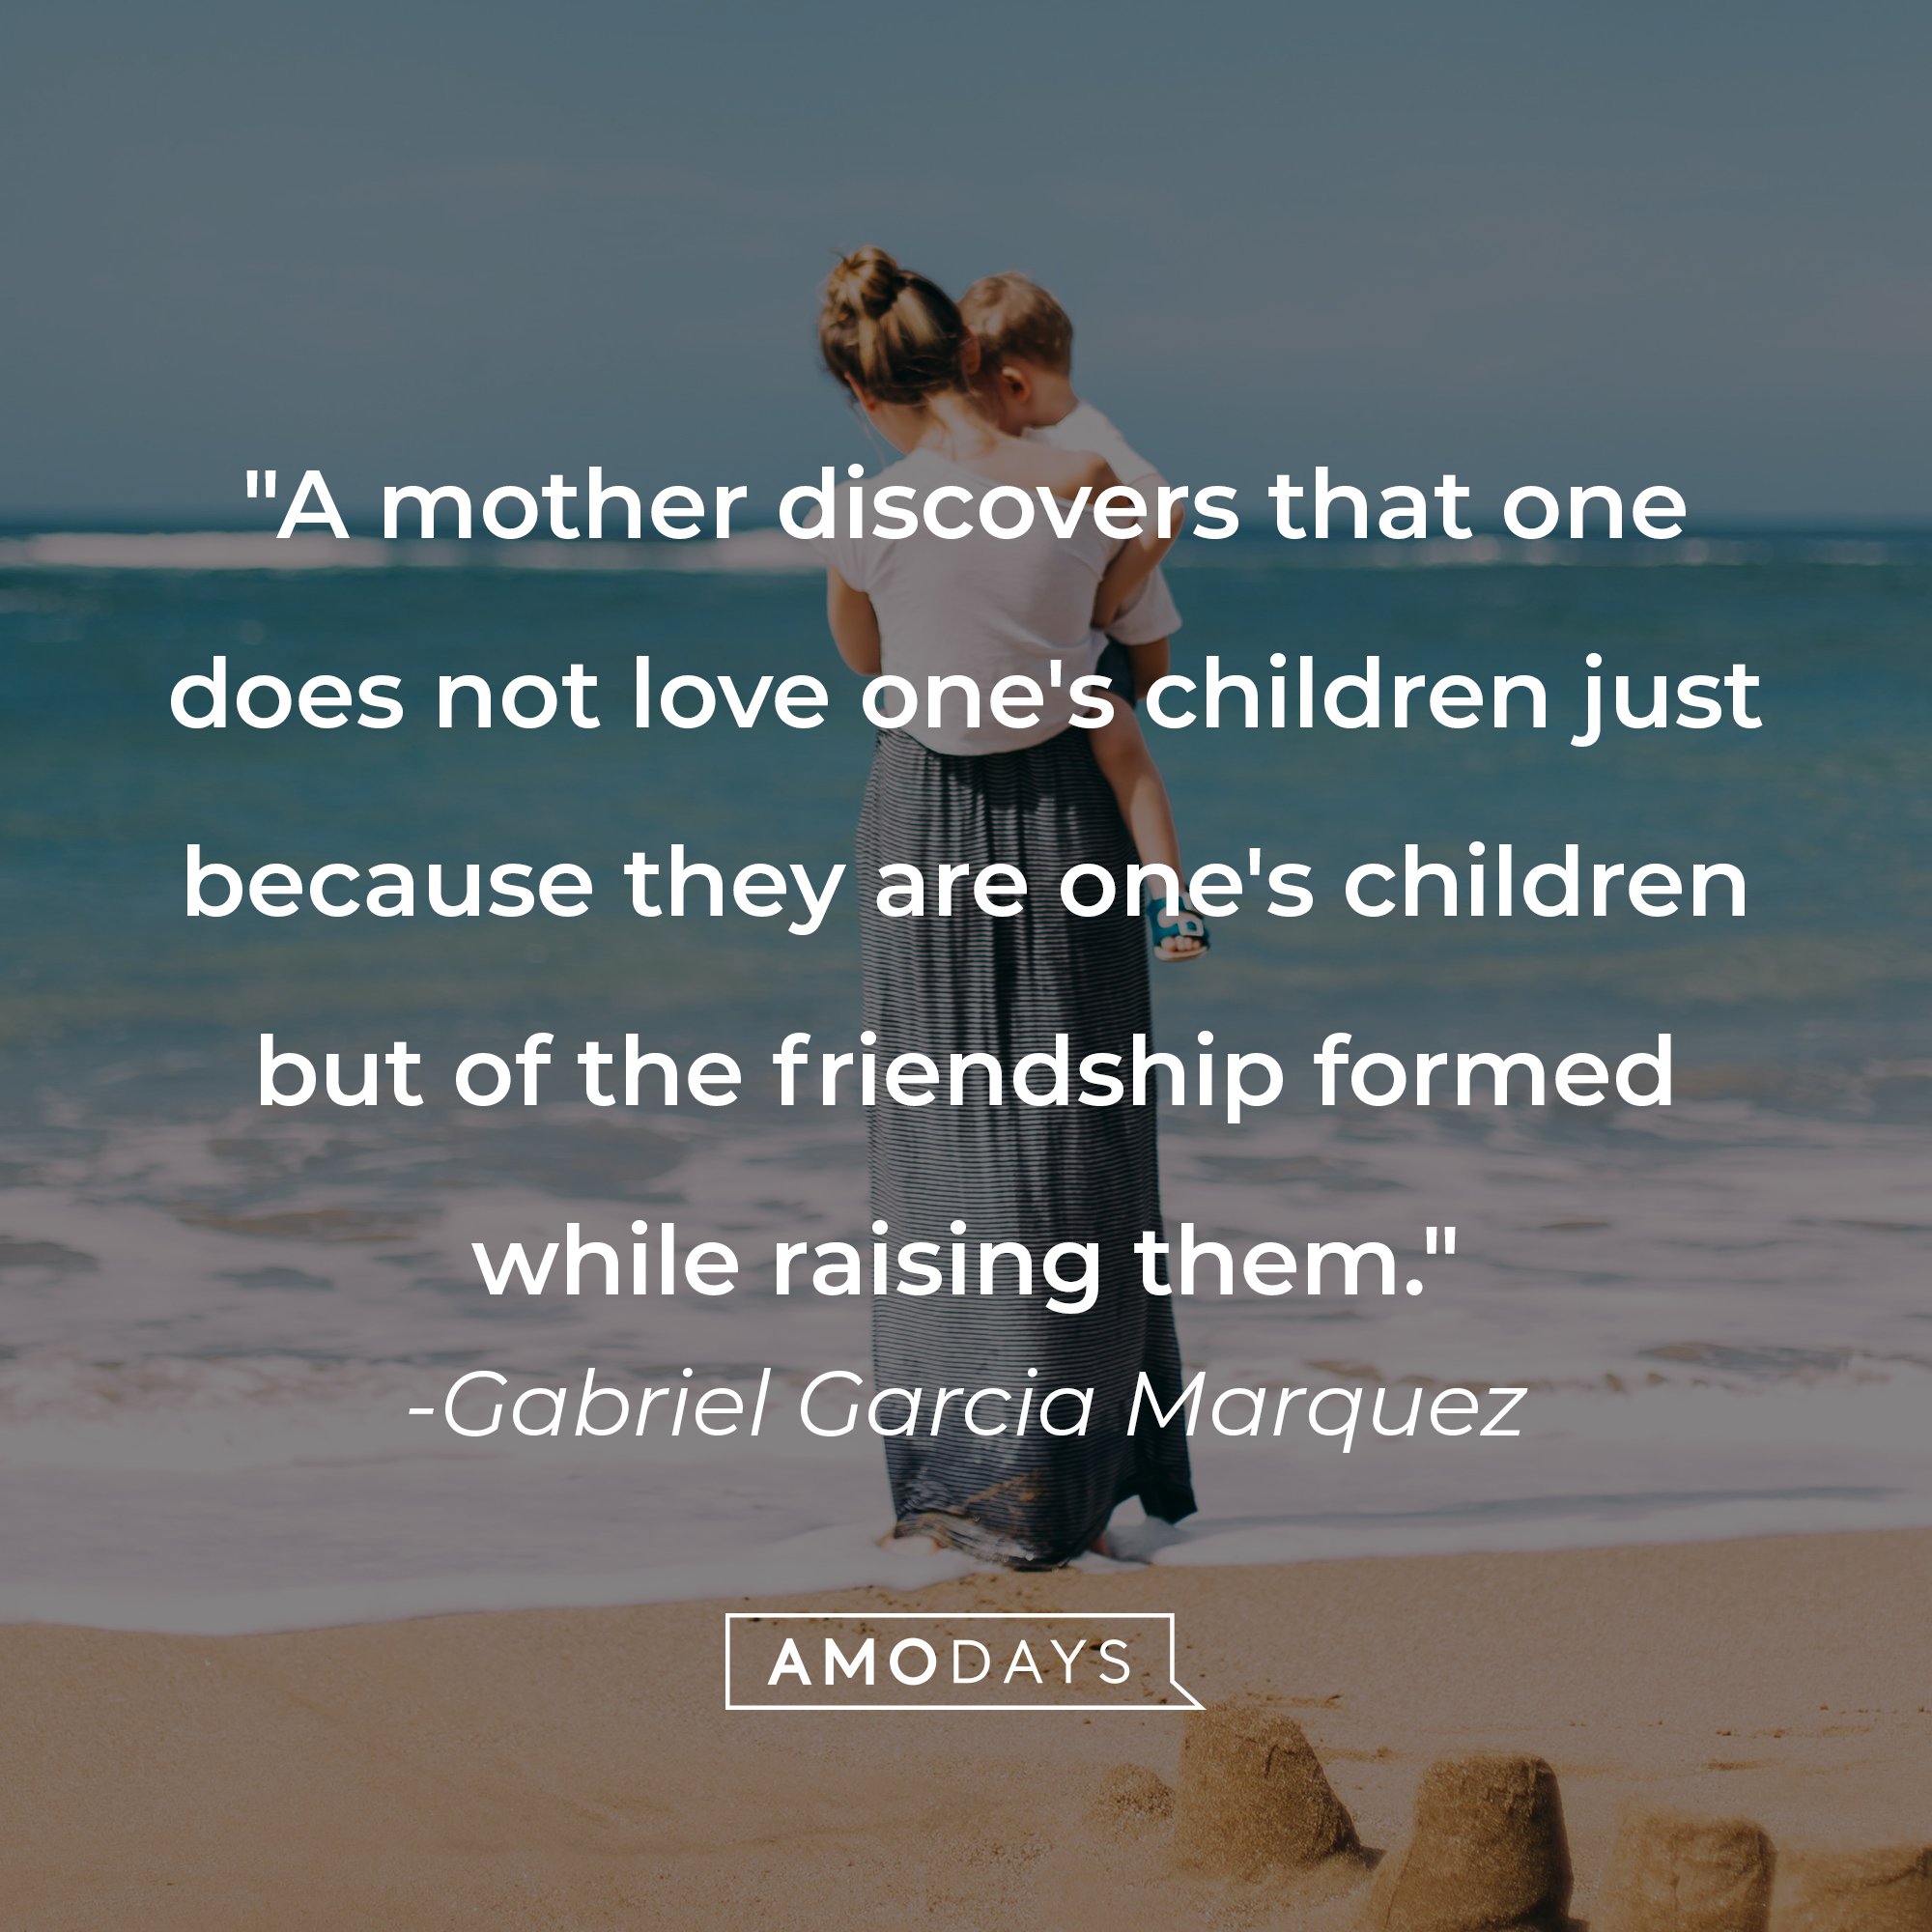 Gabriel Garcia Marquez's quote: "A mother discovers that one does not love one's children just because they are one's children but of the friendship formed while raising them." | Image: AmoDays